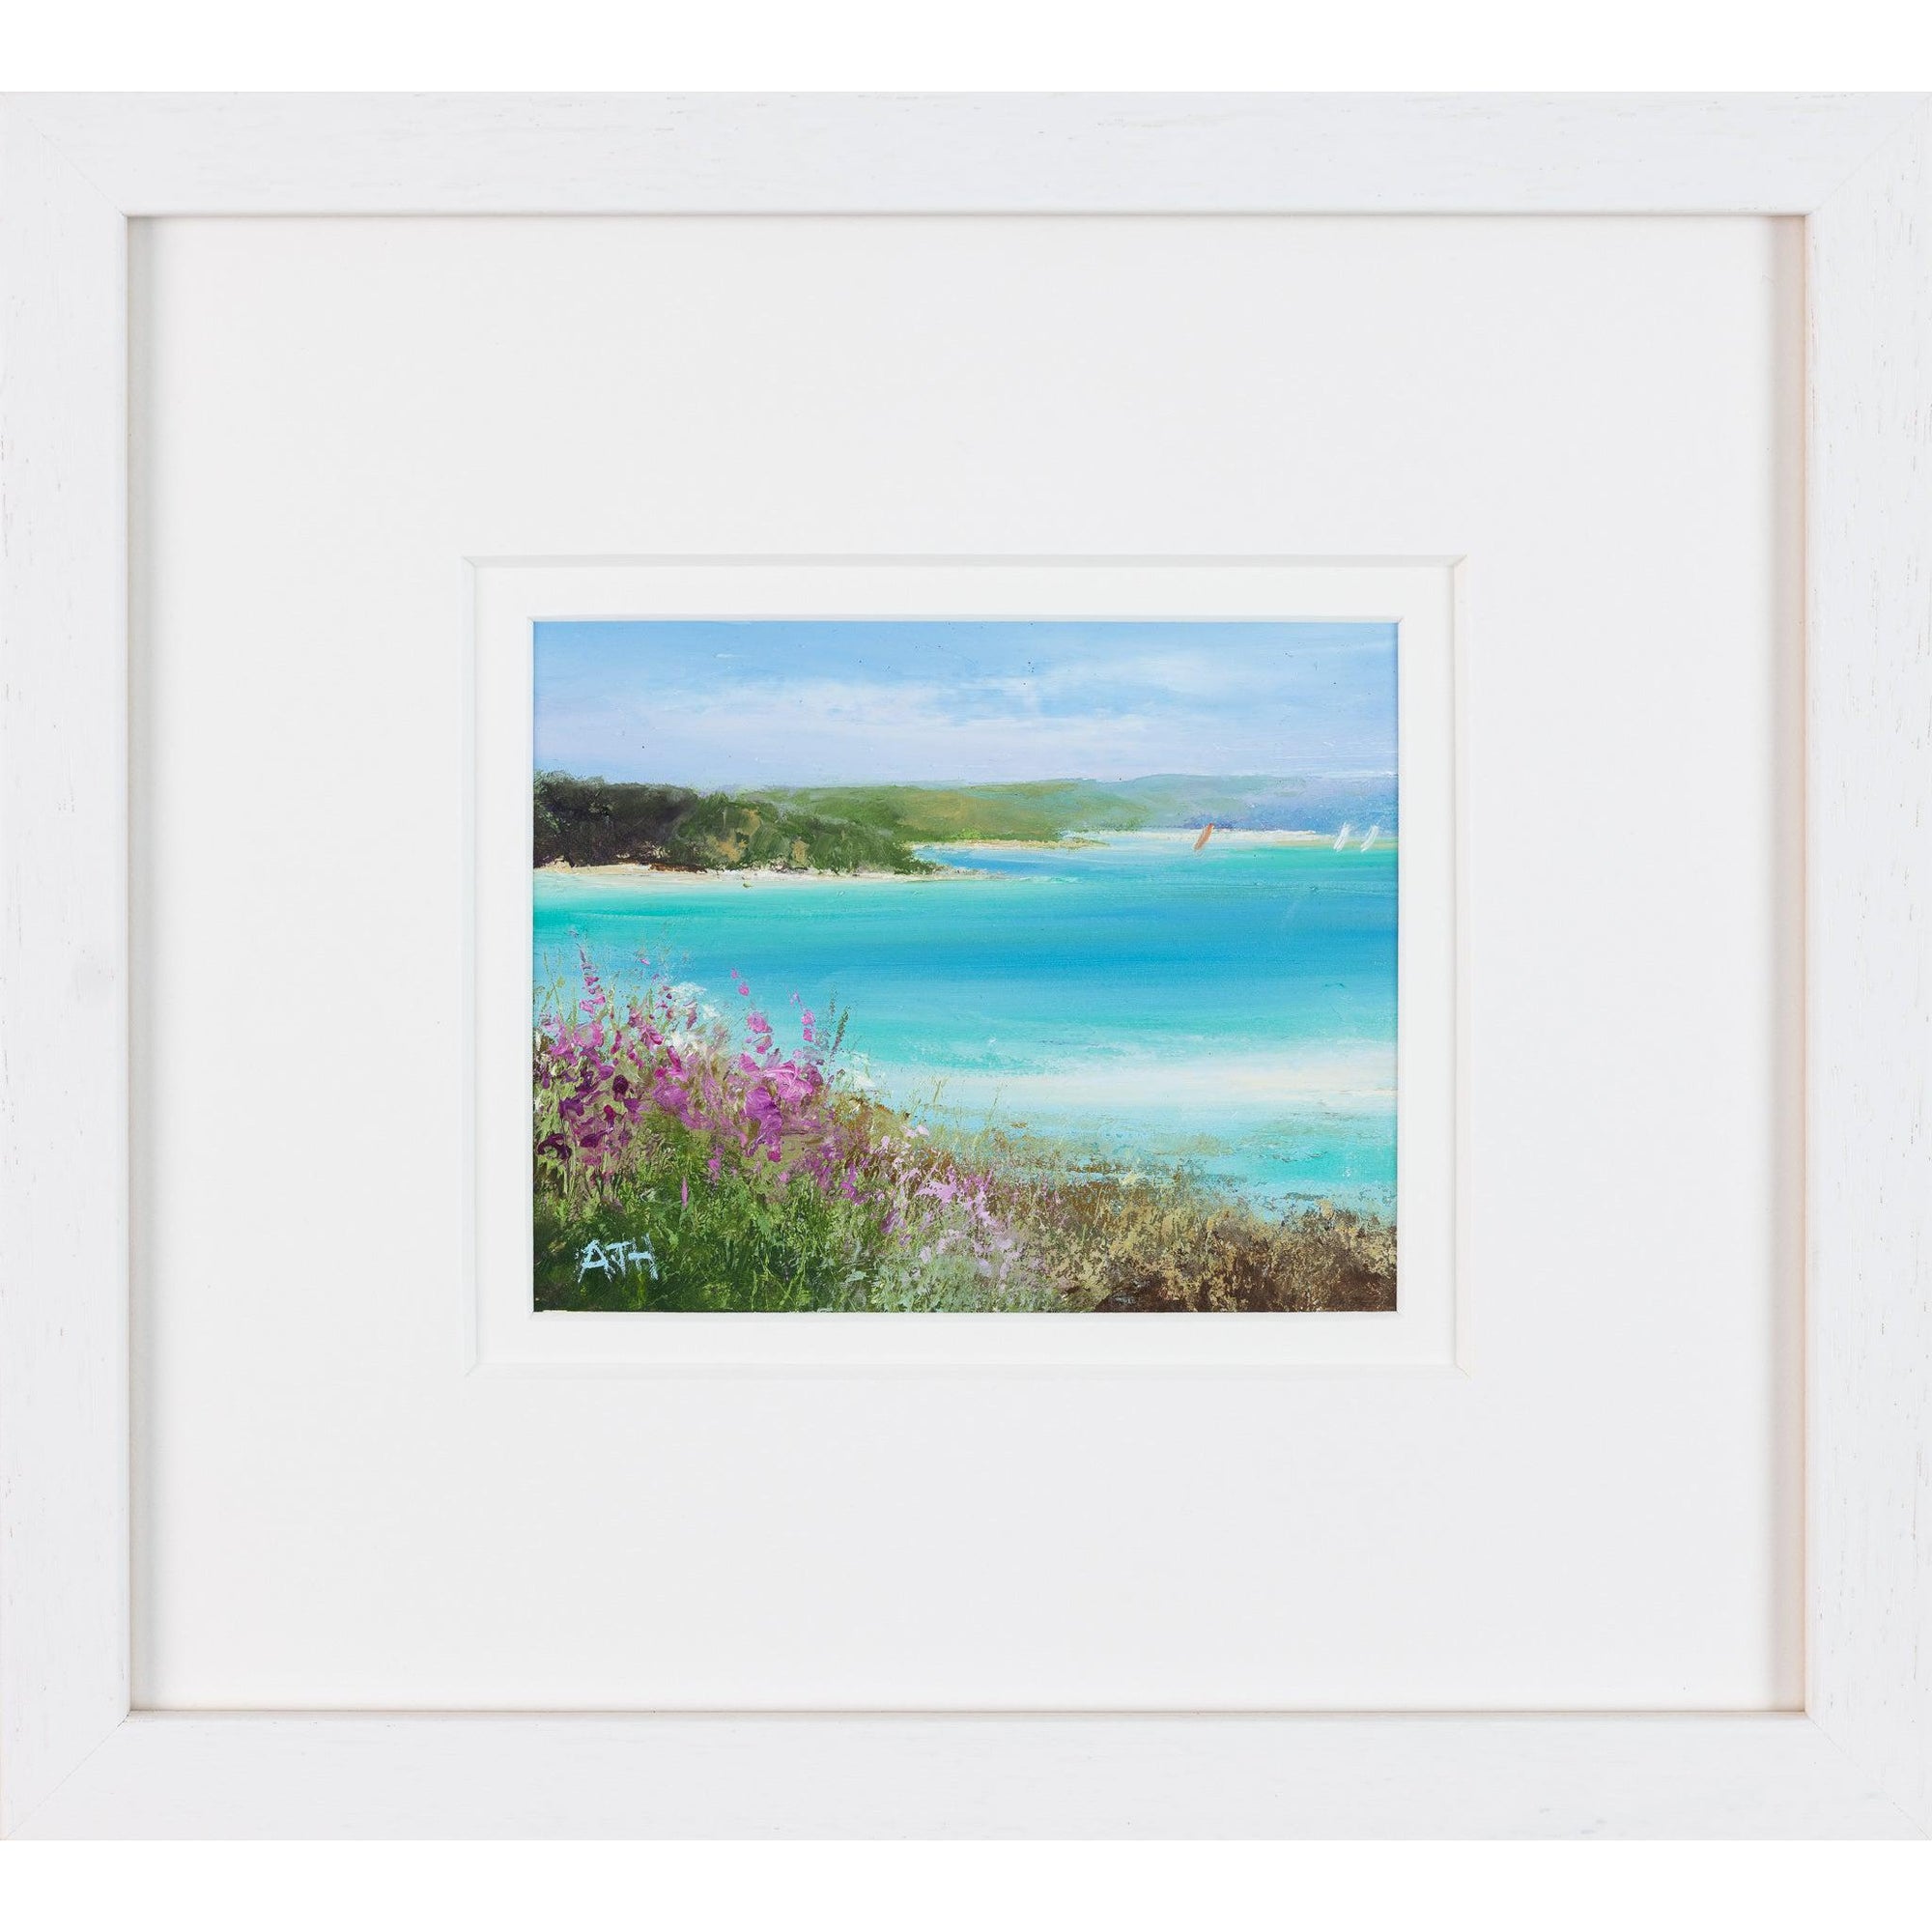 'View across the Estuary' oil on paper original by Amanda Hoskin, available at Padstow Gallery, Cornwall